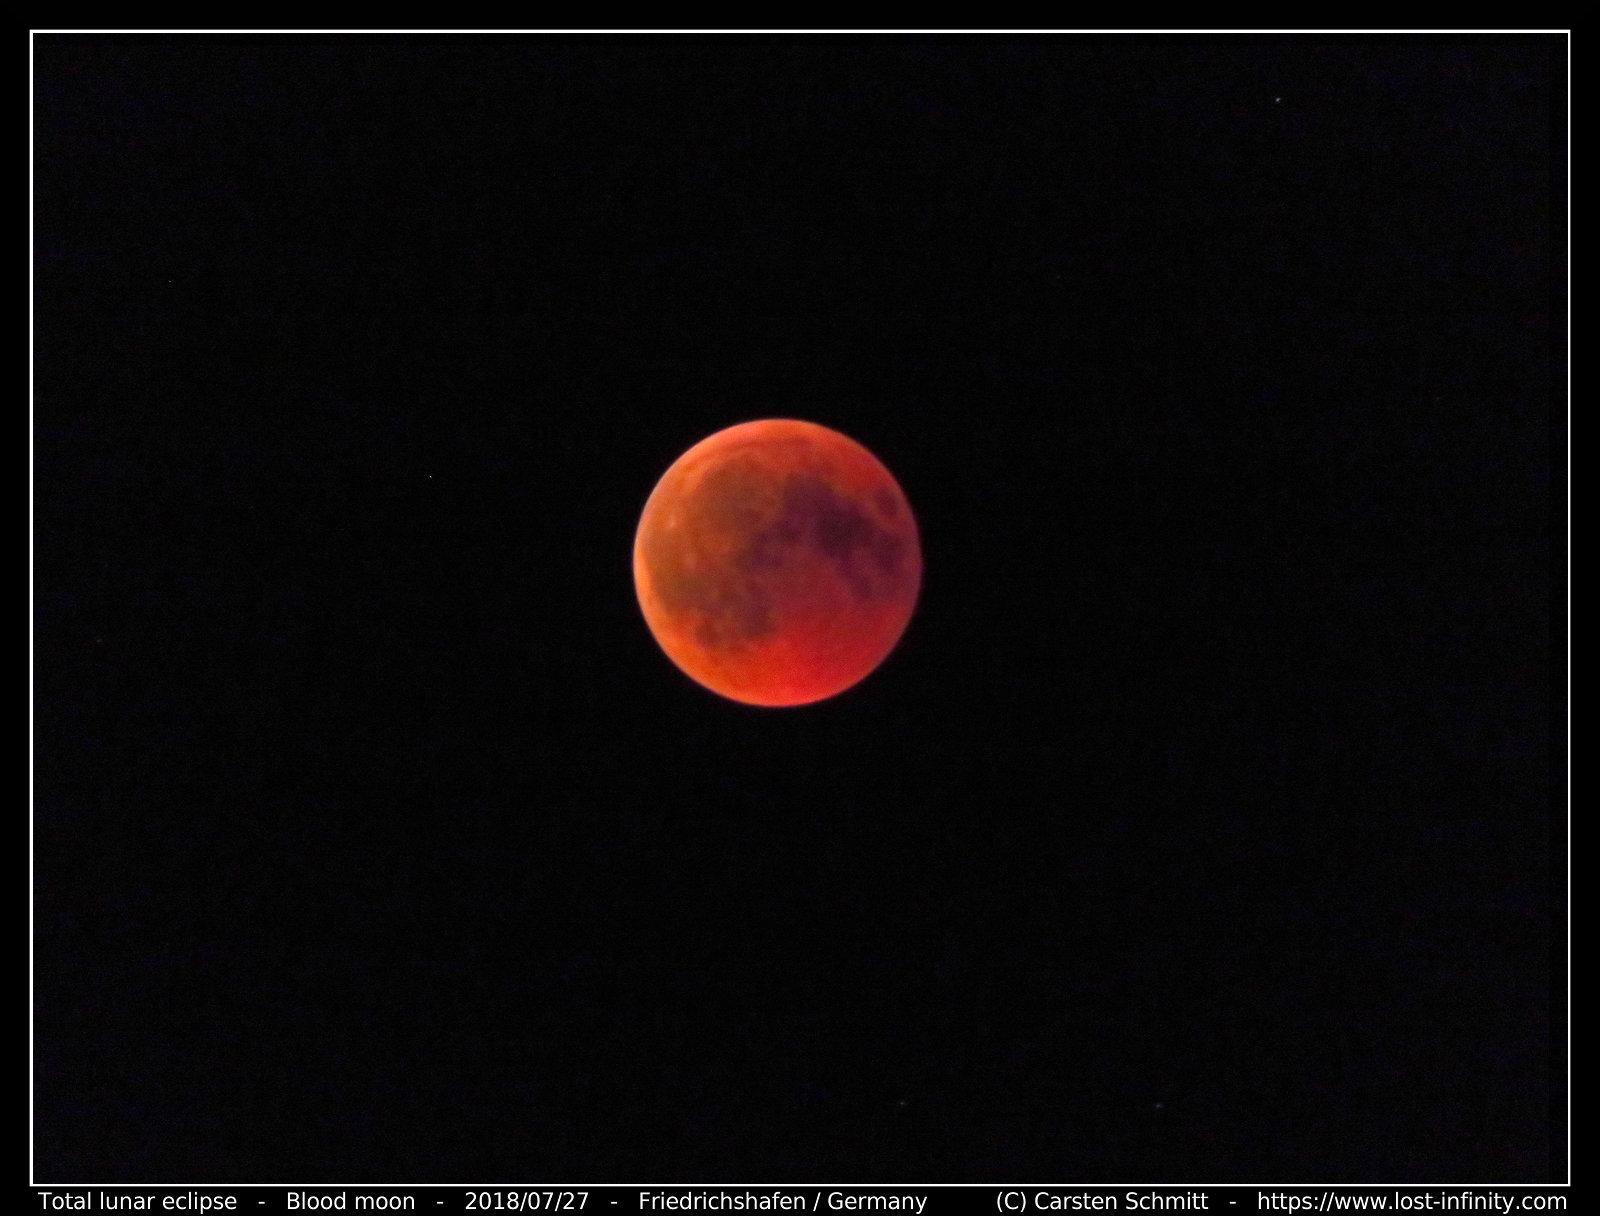 Blood moon with Canon PowerShot SX710 HS